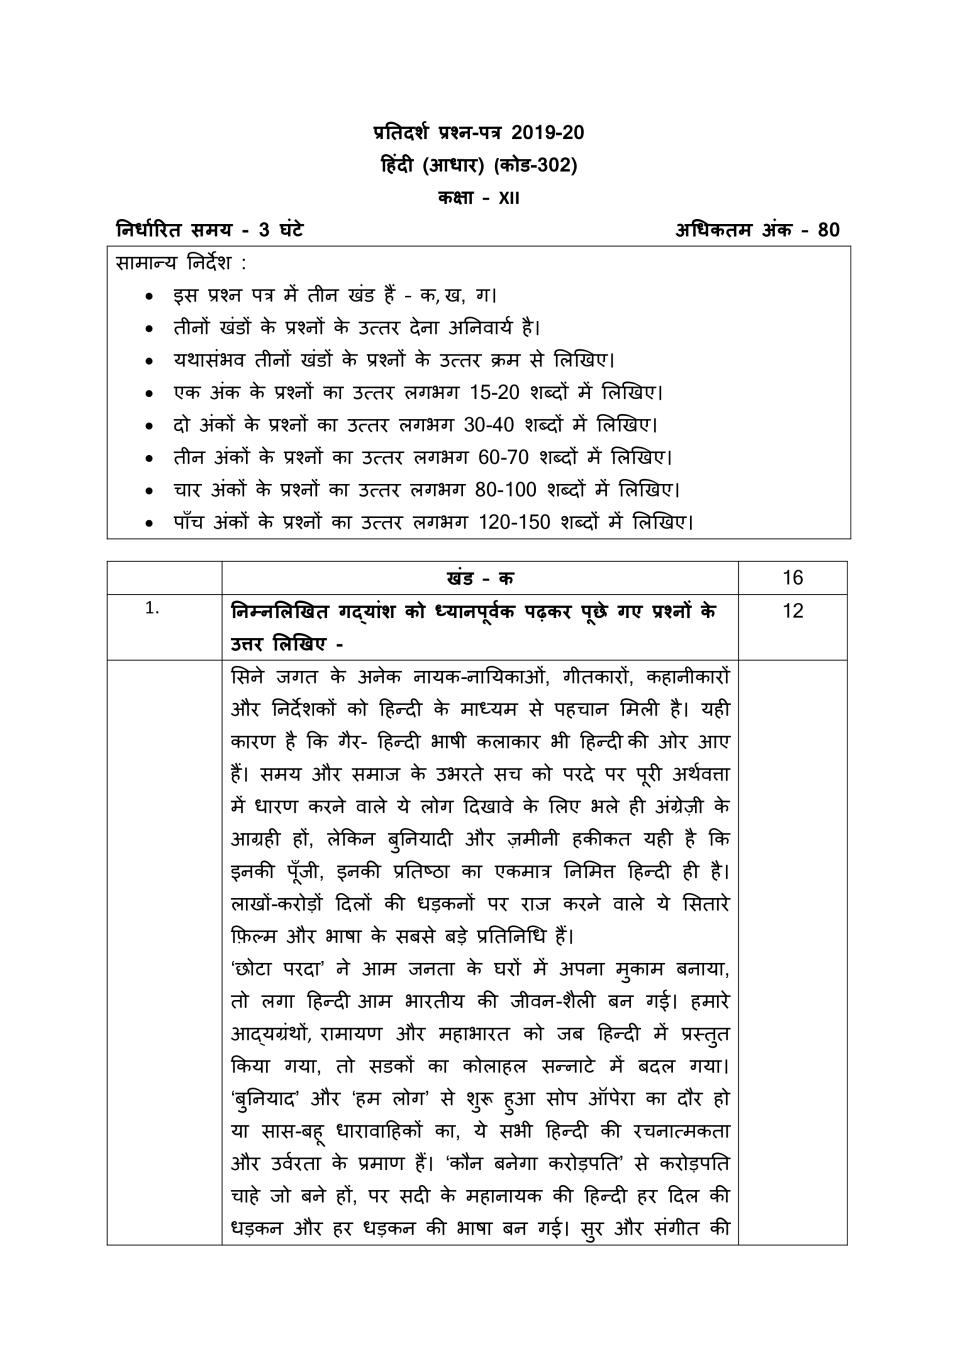 CBSE Class 12 Sample Paper 2020 for Hindi Core - Page 1